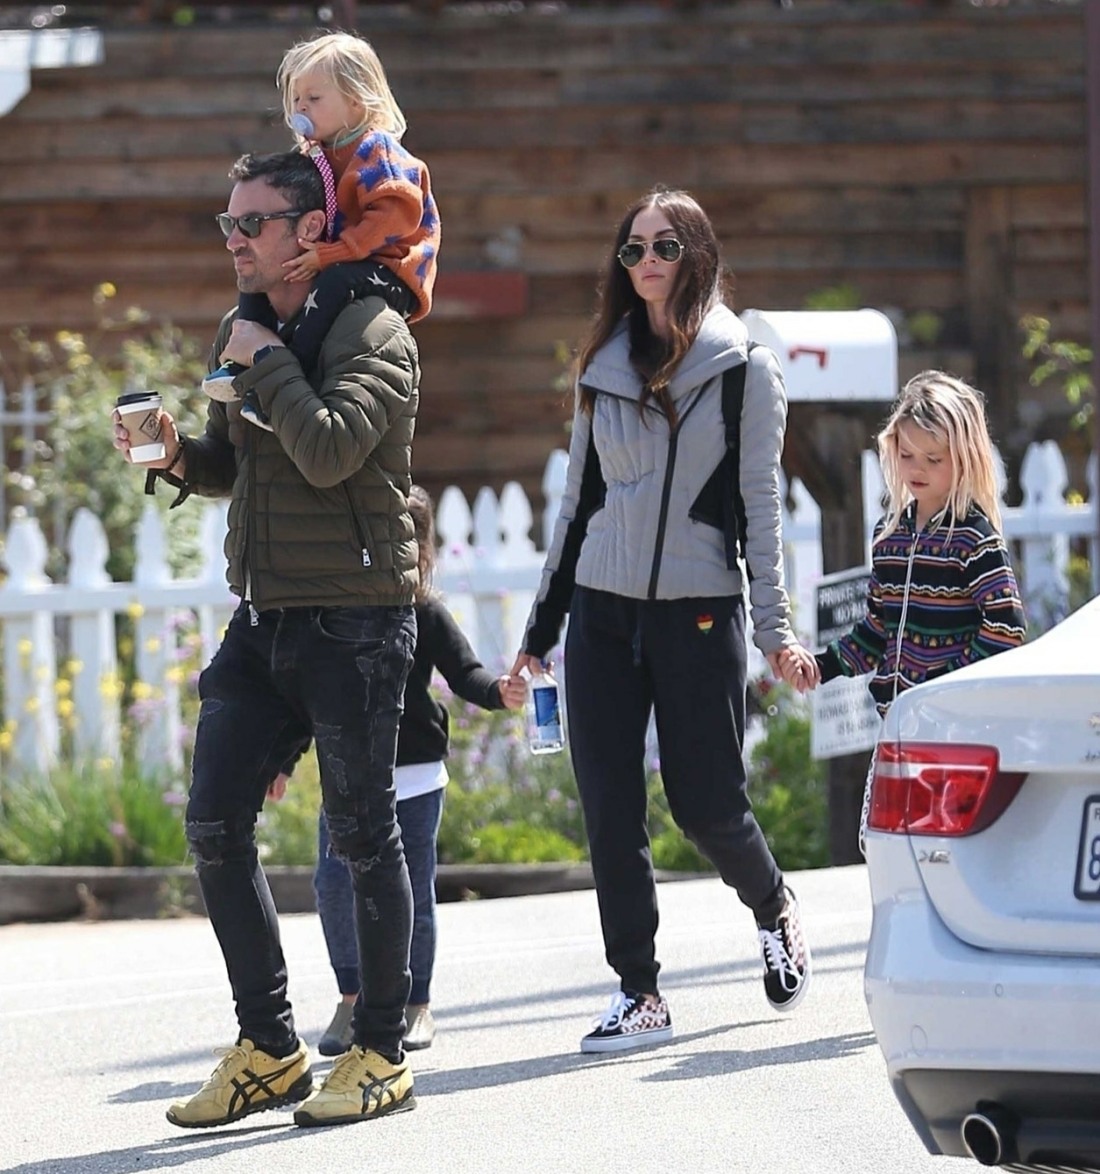 Megan Fox and Brian Austin Green are seen with their kids at the farmers market and target